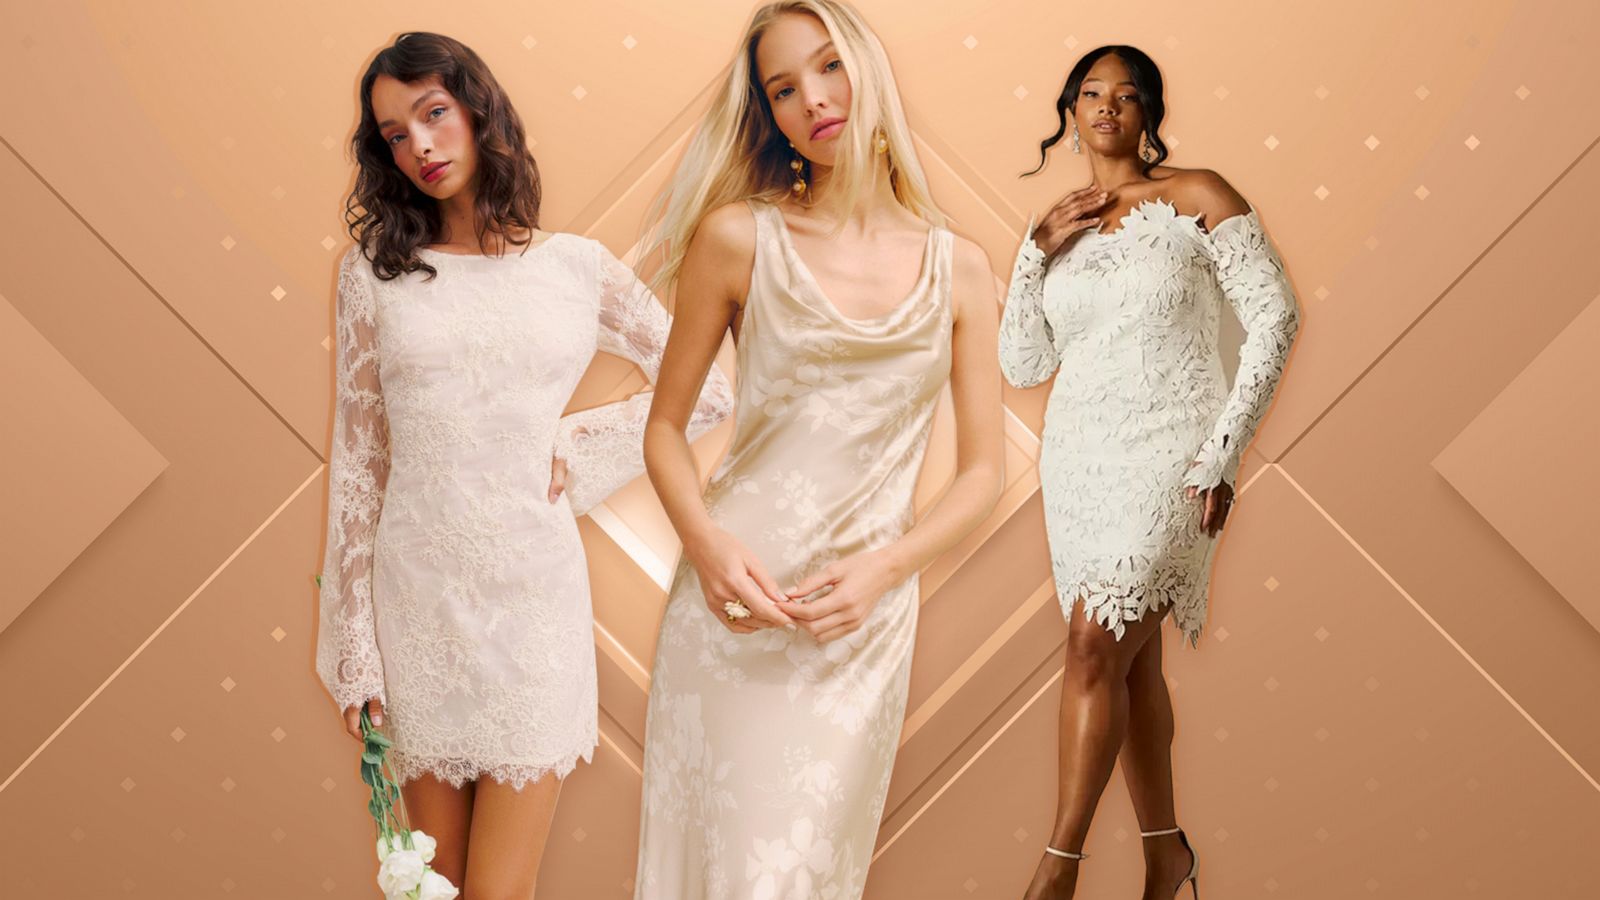 What to wear to your courthouse wedding, according to a bridal stylist -  Good Morning America